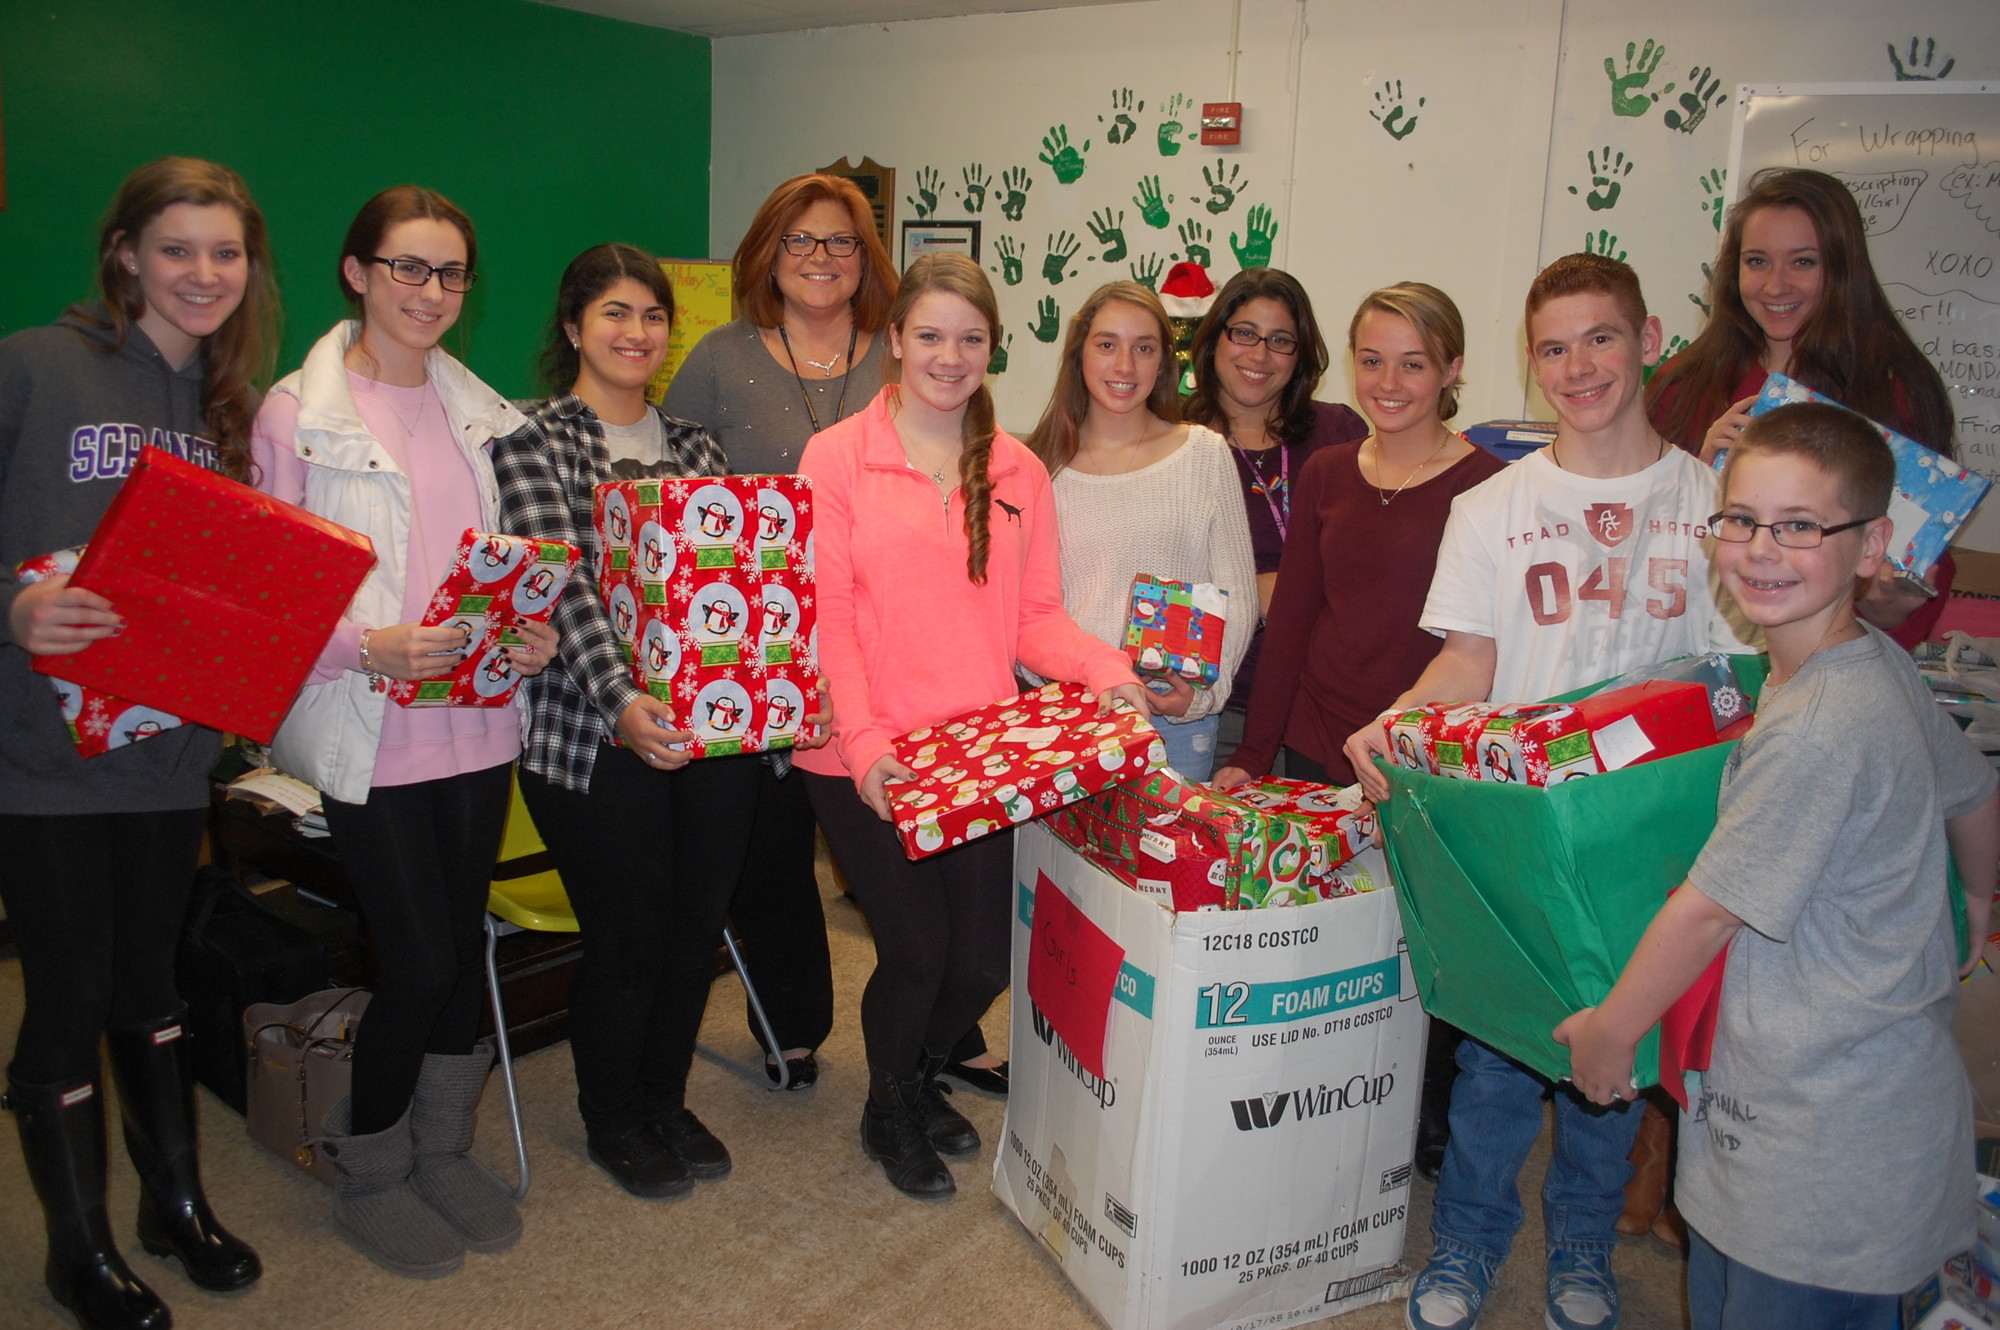 The Seaford High School Student Council is collecting toys to give to needy children on Long Island. Pictured are members Kristina Bouretis, Alexa Meyer, Kelly Chamberlain, Amanda Cupo, Anna Gagliano, Cassidy Meyer, Conor Crean, Noah Crean and advisers Shari Raduazzo and Tania Cintorino. Not pictured are Maggie Crean, James Irwin, Ben Schwartz and Nicole Anastasiou.